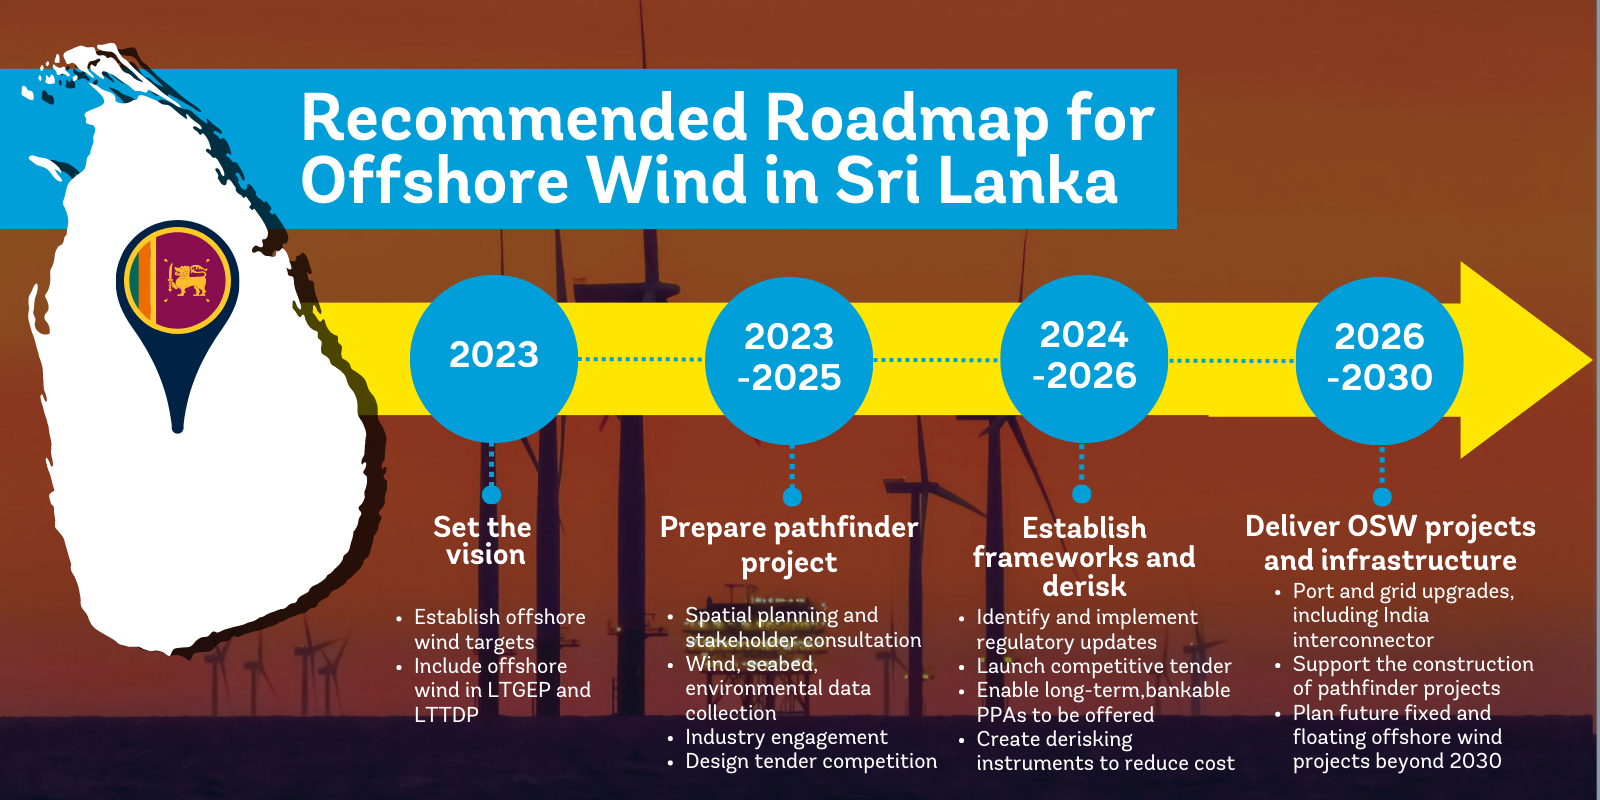 Recommended Roadmap for Offshore Wind in Sri Lanka